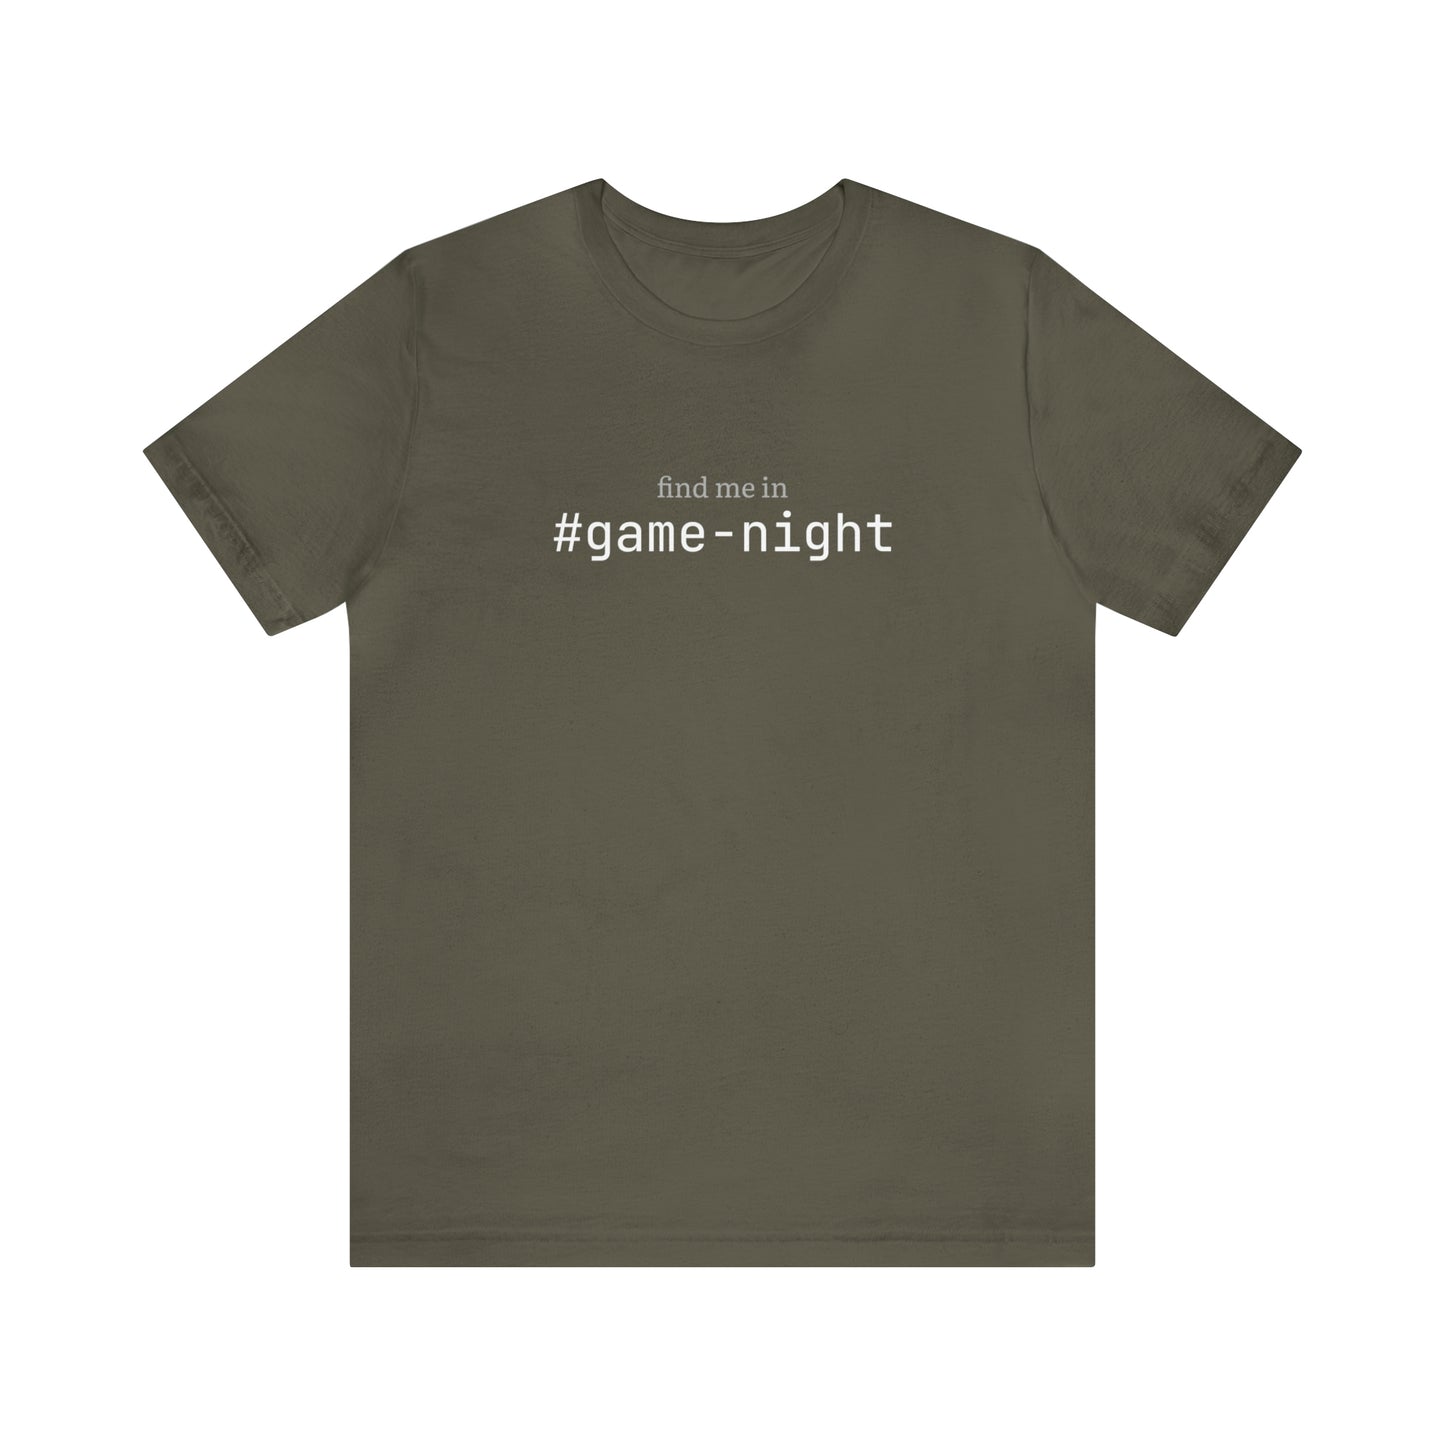 Find me in #game-night T-Shirt